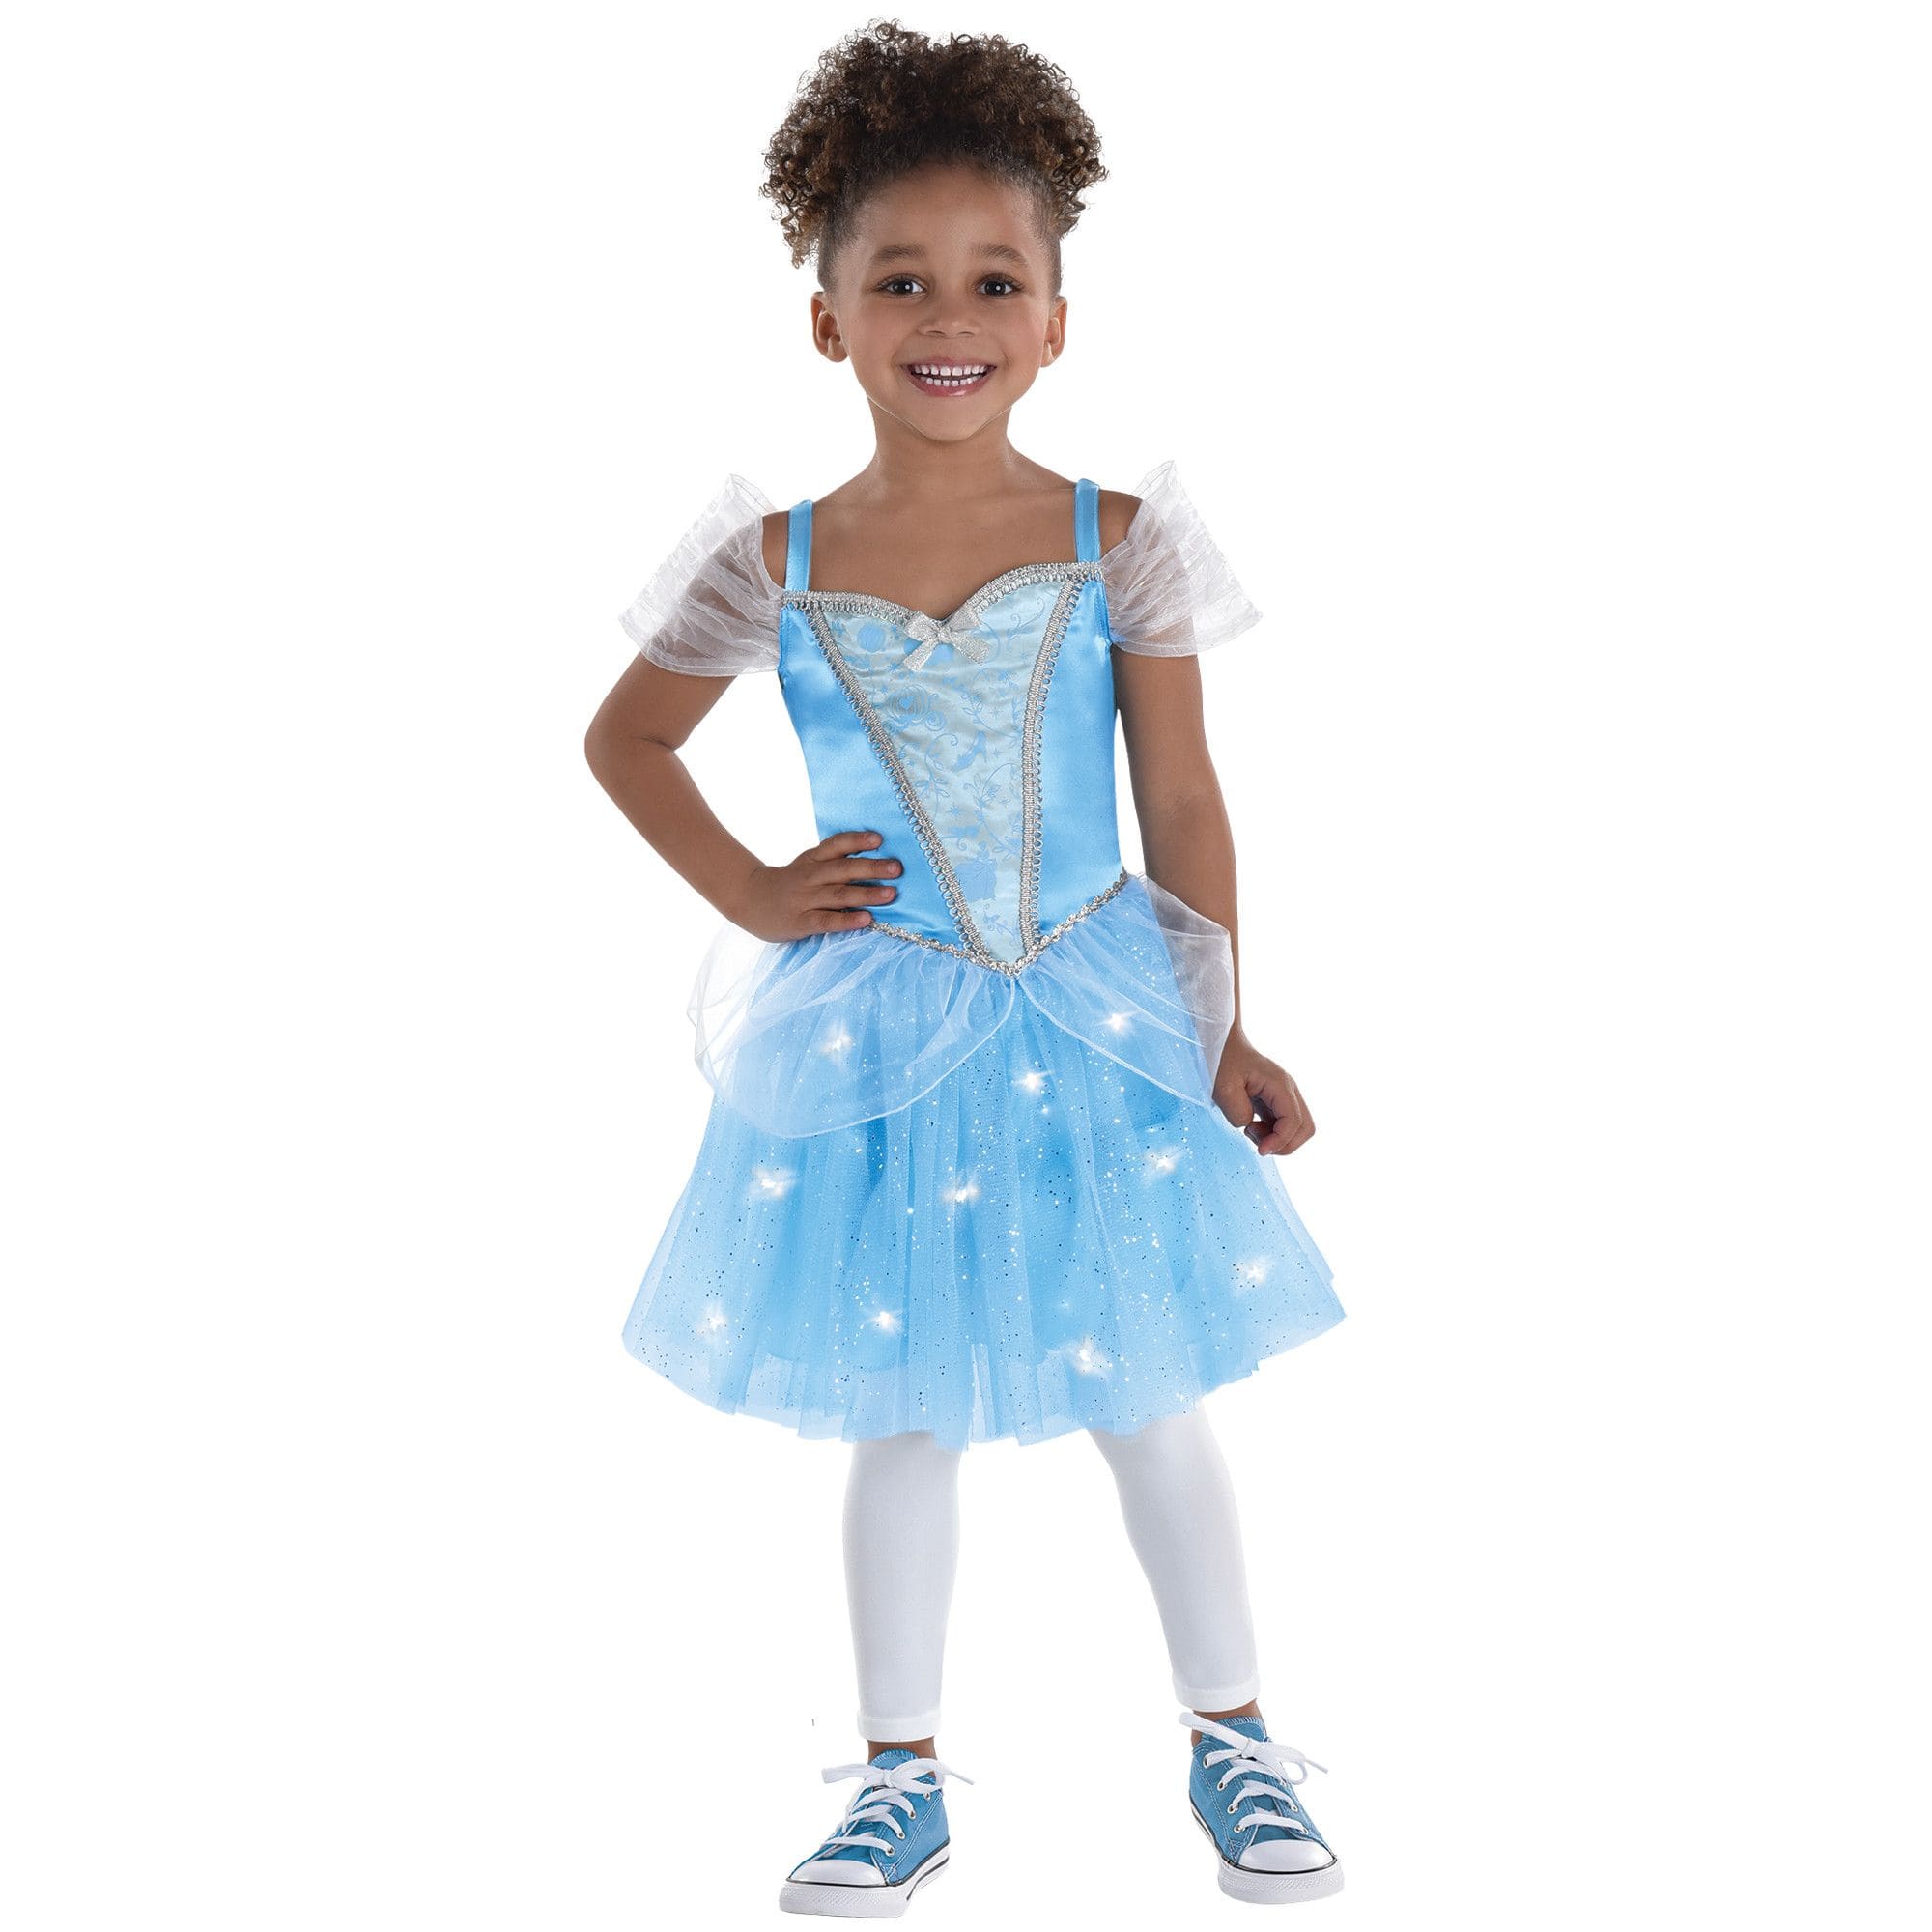 17 Cinderella Costume Ideas - Cinderella Dresses for Kids and Adults